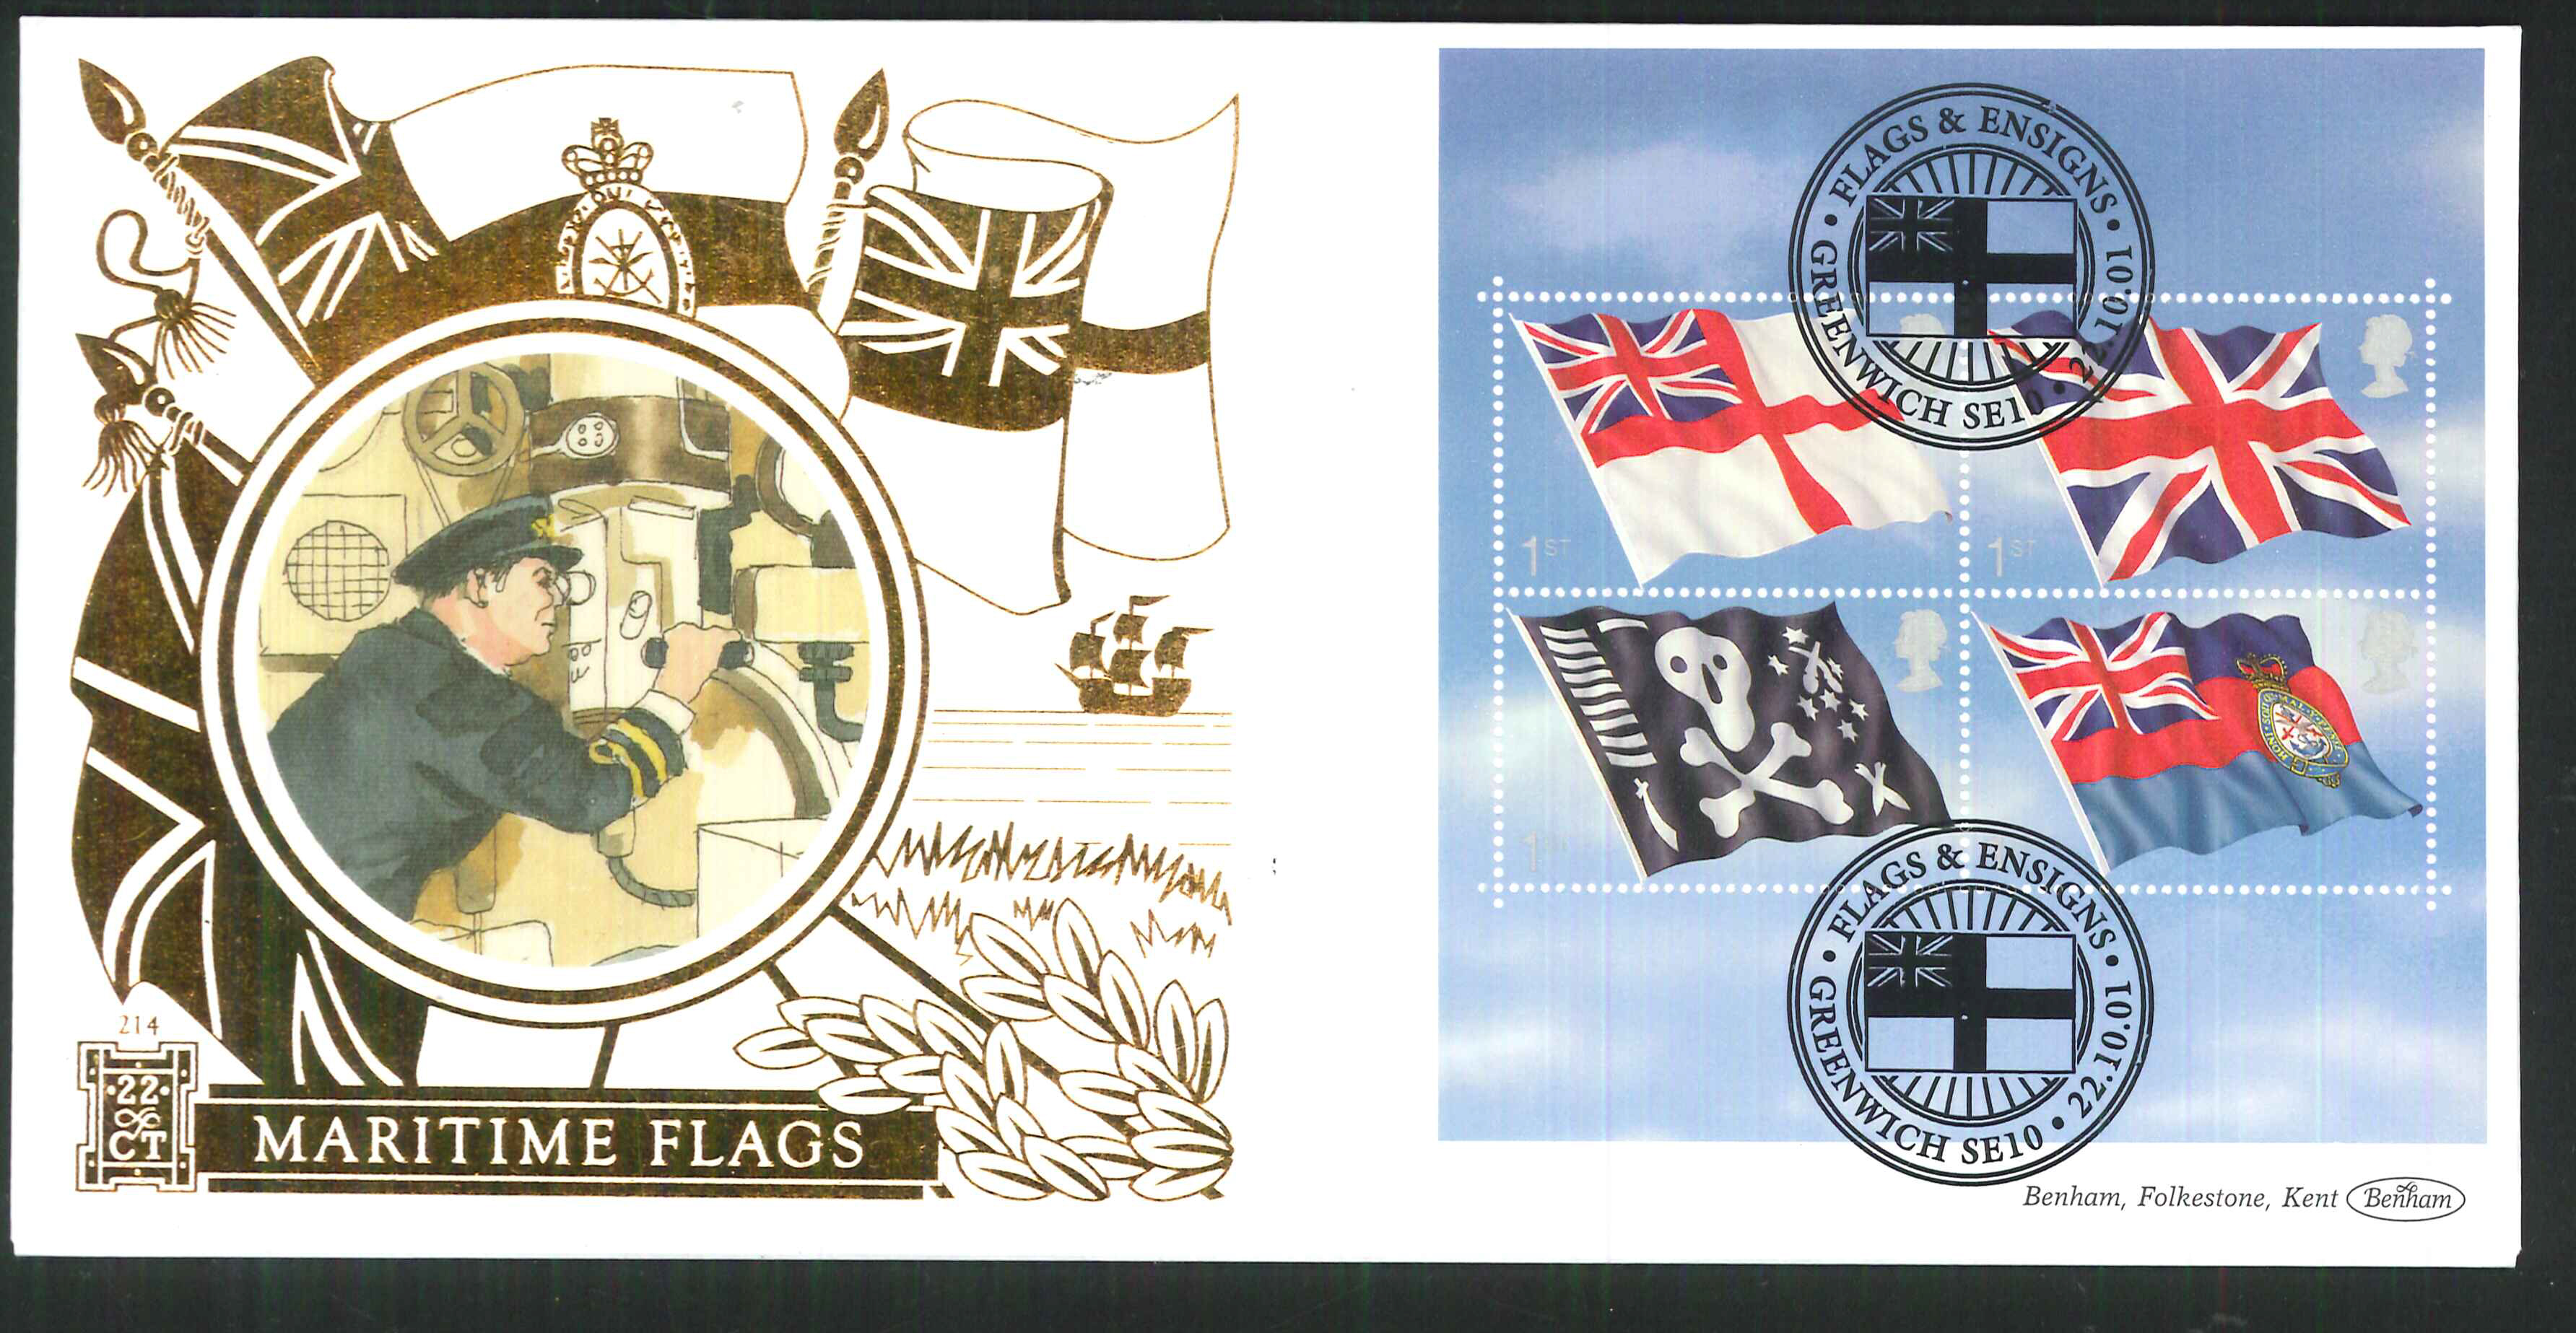 2001 - Flags & Ensigns M/S FDC Benham 22ct Gold 500 - Grenwich SE10 Postmark - Click Image to Close